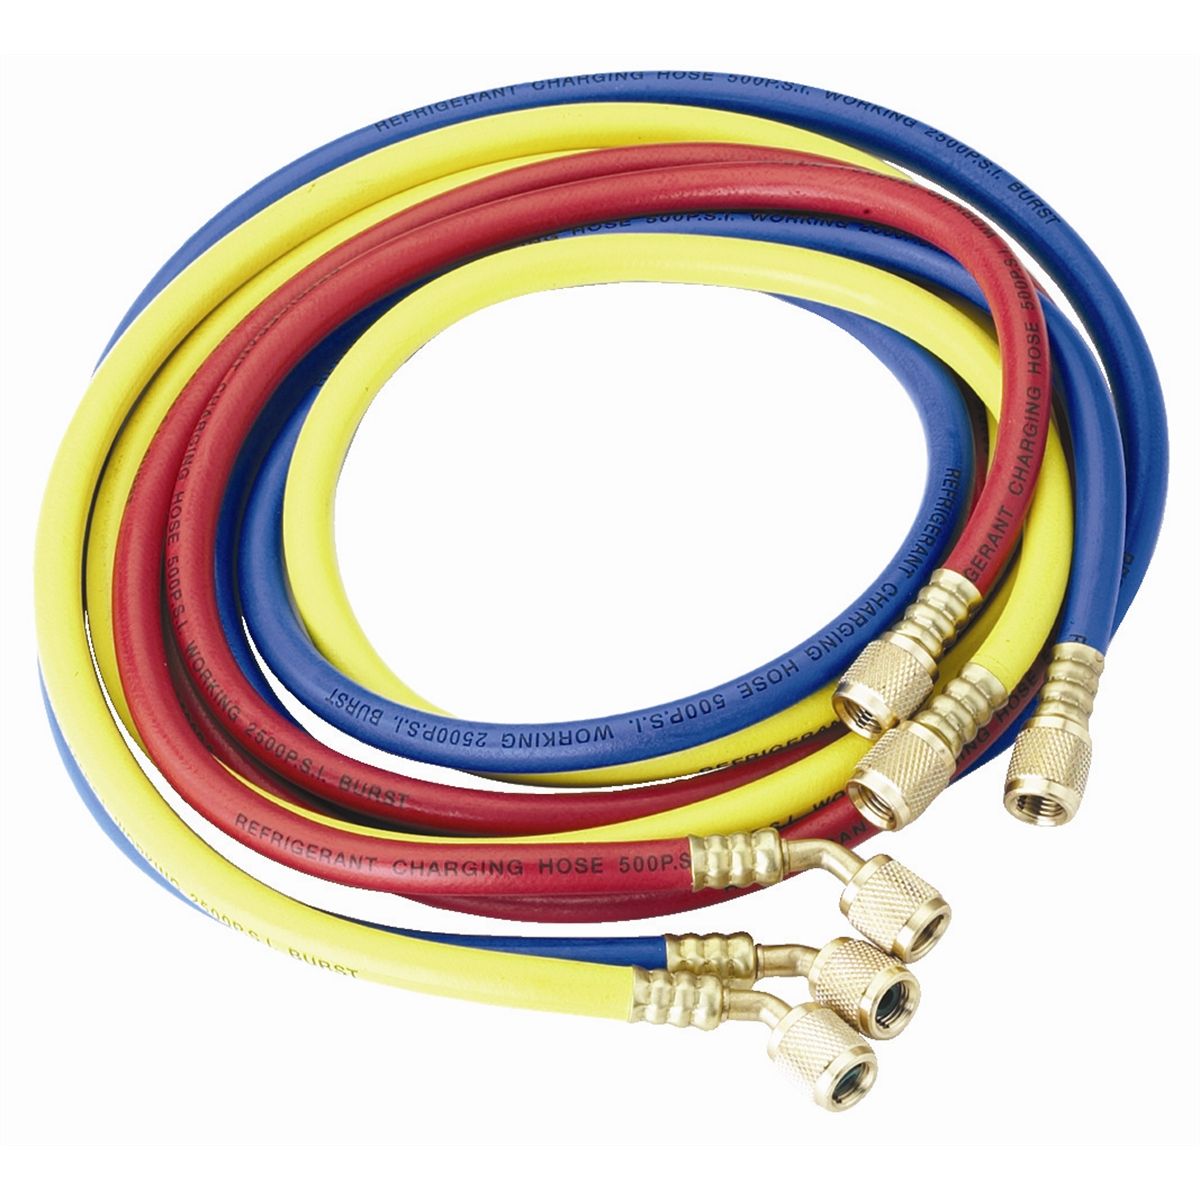 Red, Yellow & Blue Charging Hose Set - 72 Inch 1/4 Inch Std